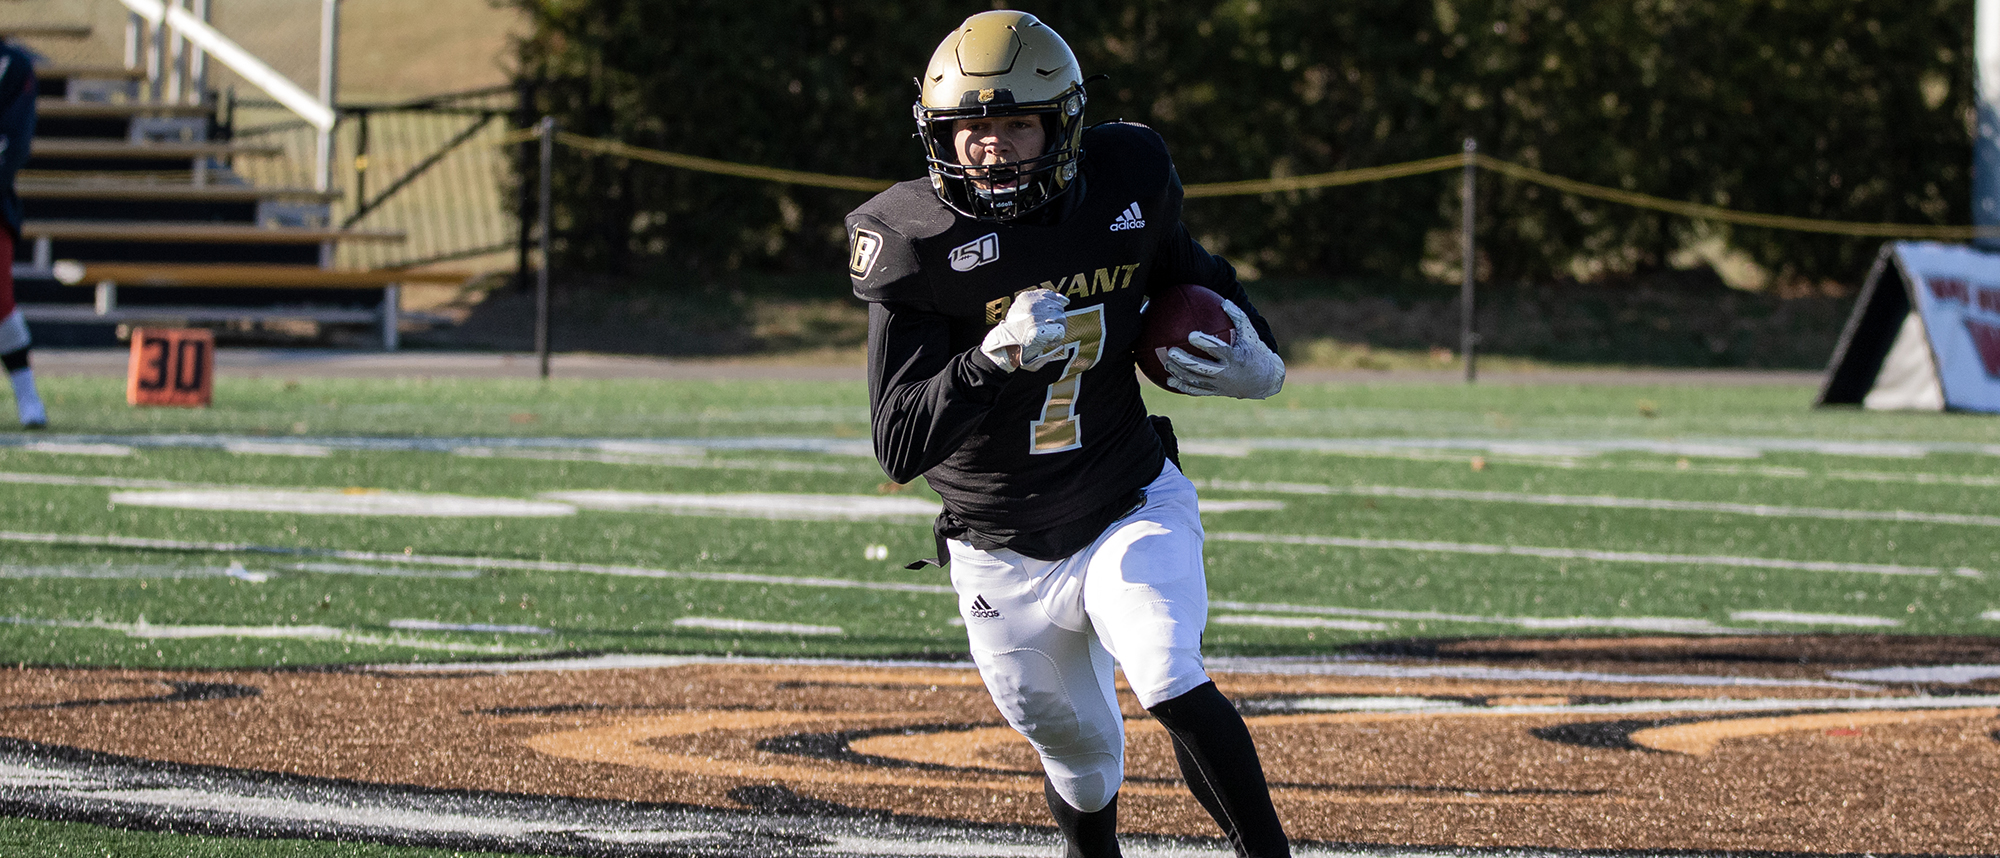 Bryant visits Wagner in 2019 finale